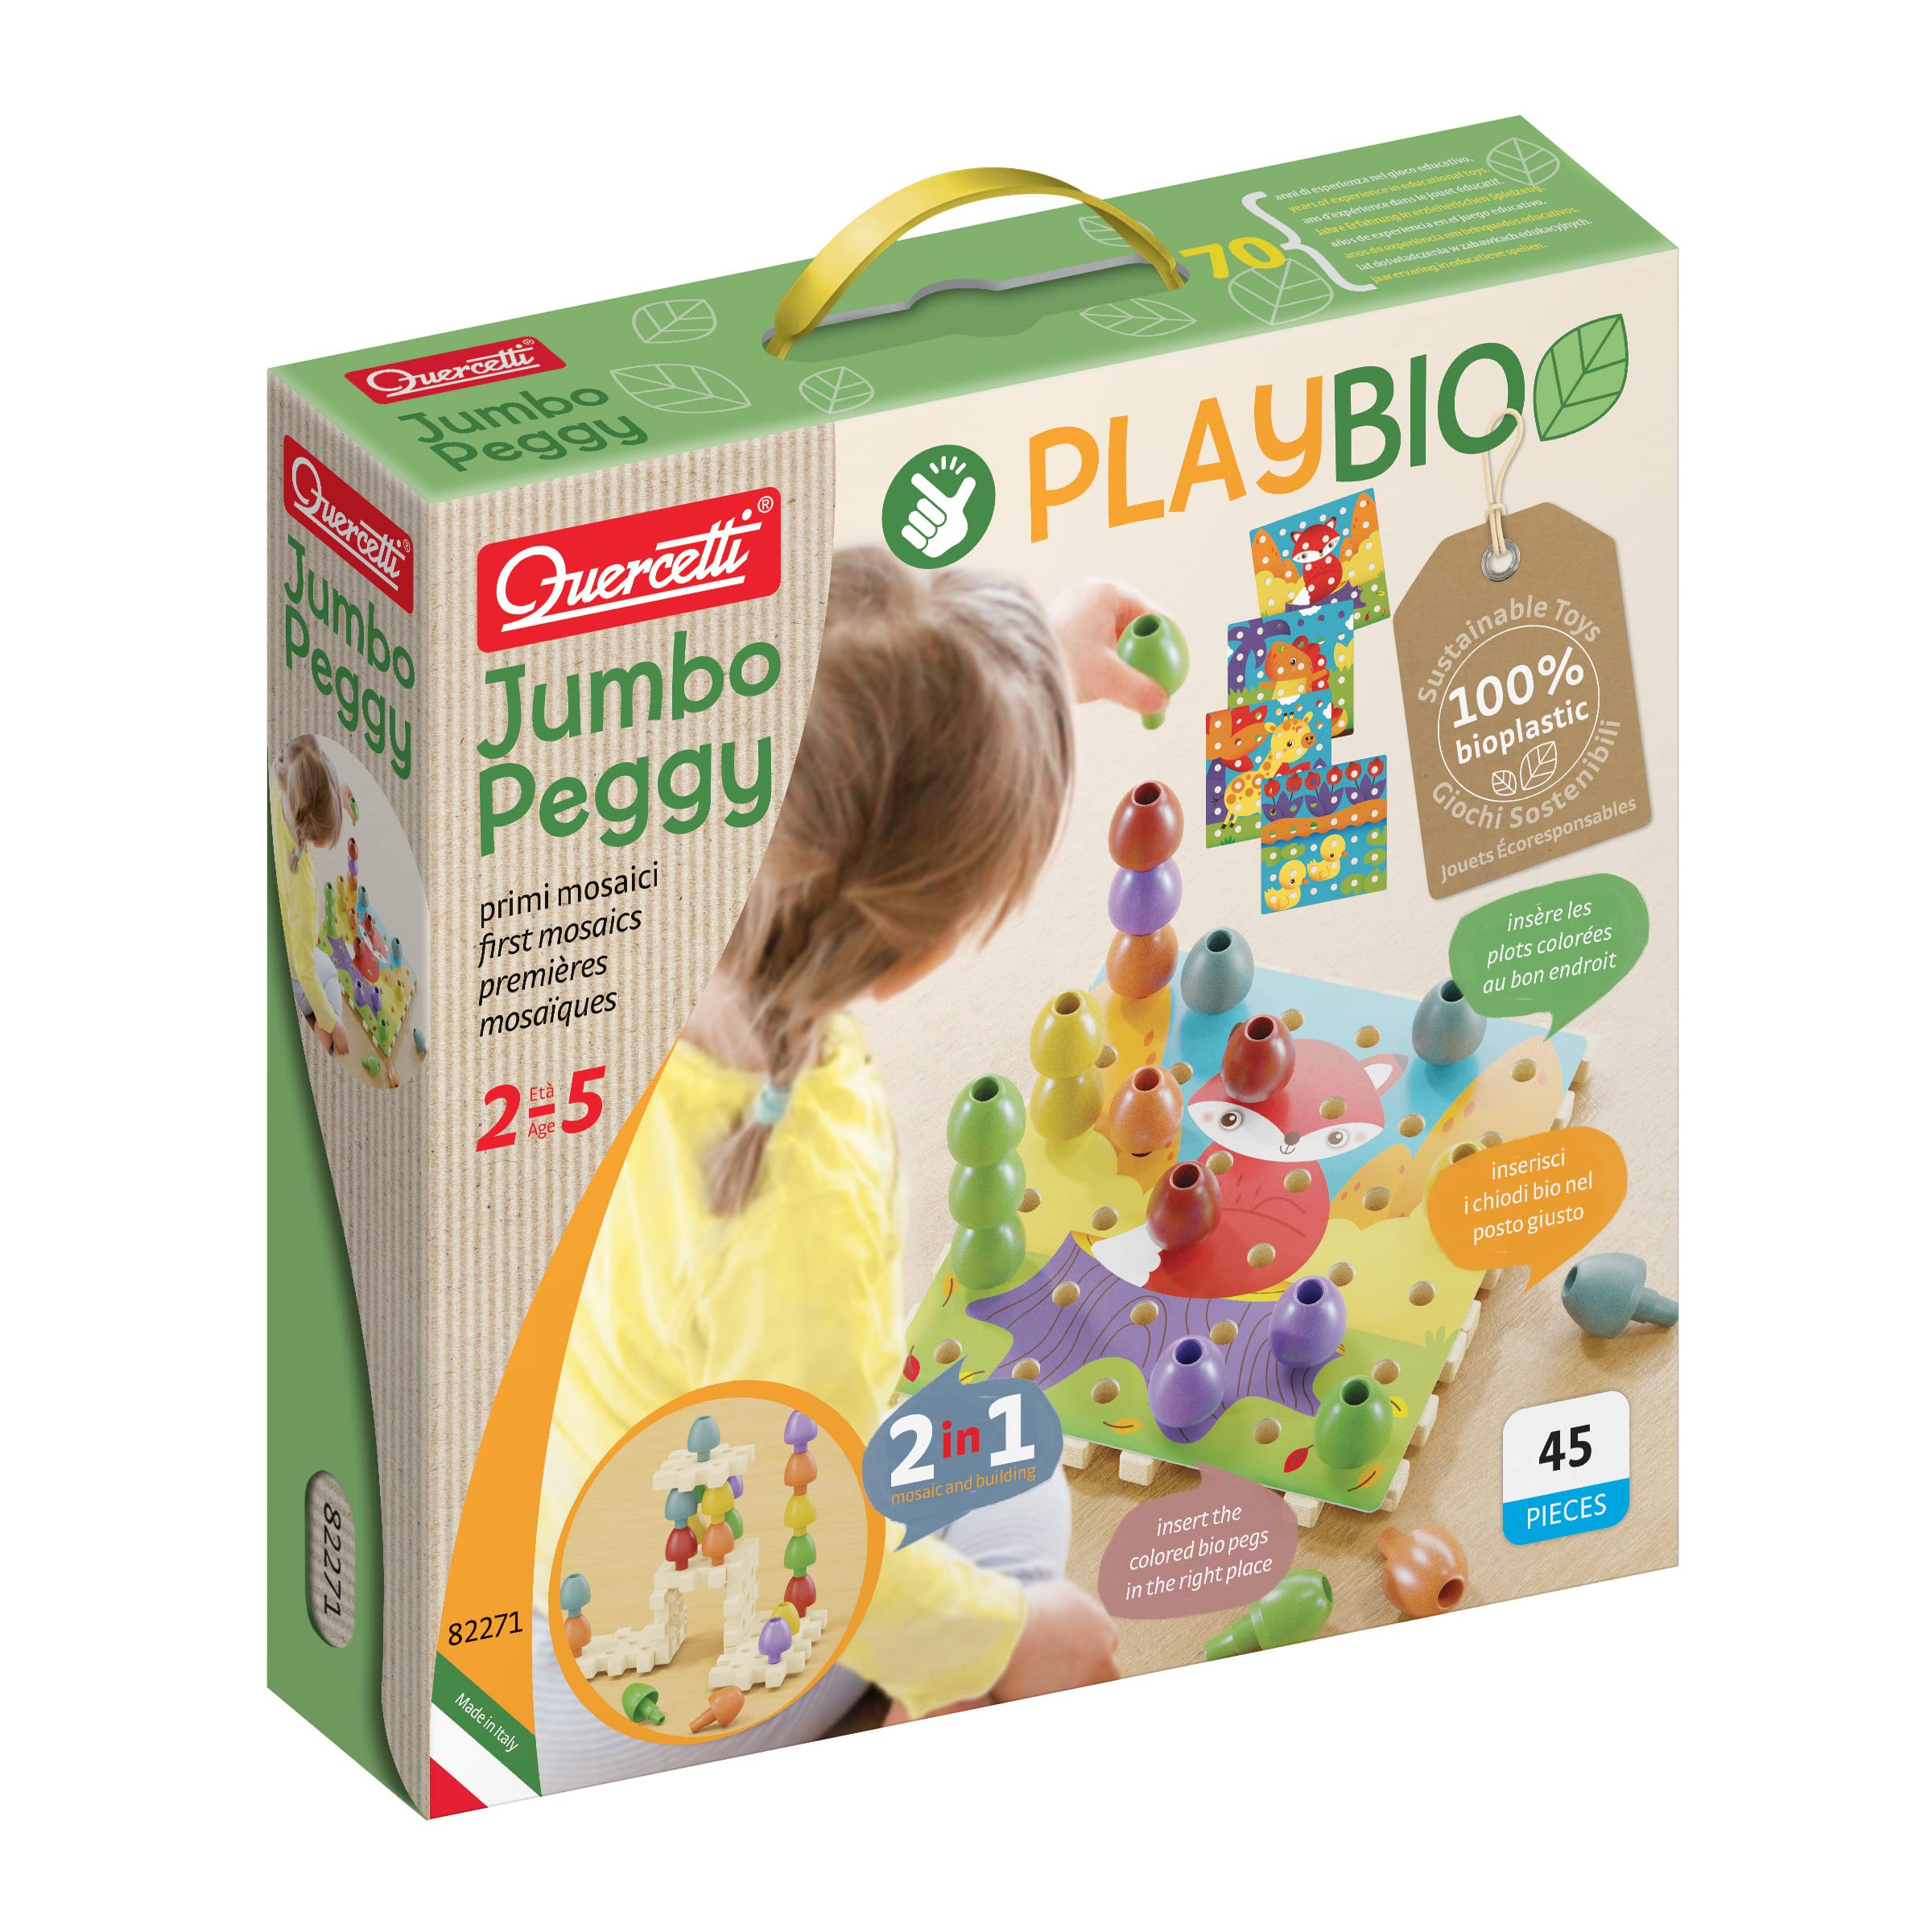 Quercetti PlayBio Jumbo Peggy Stacking Toy - 45 Piece Set Includes 36 Large Pegs in Natural Colors and 9 Interlocking Plates, for Kids Ages 2-5 Years, Multicolor